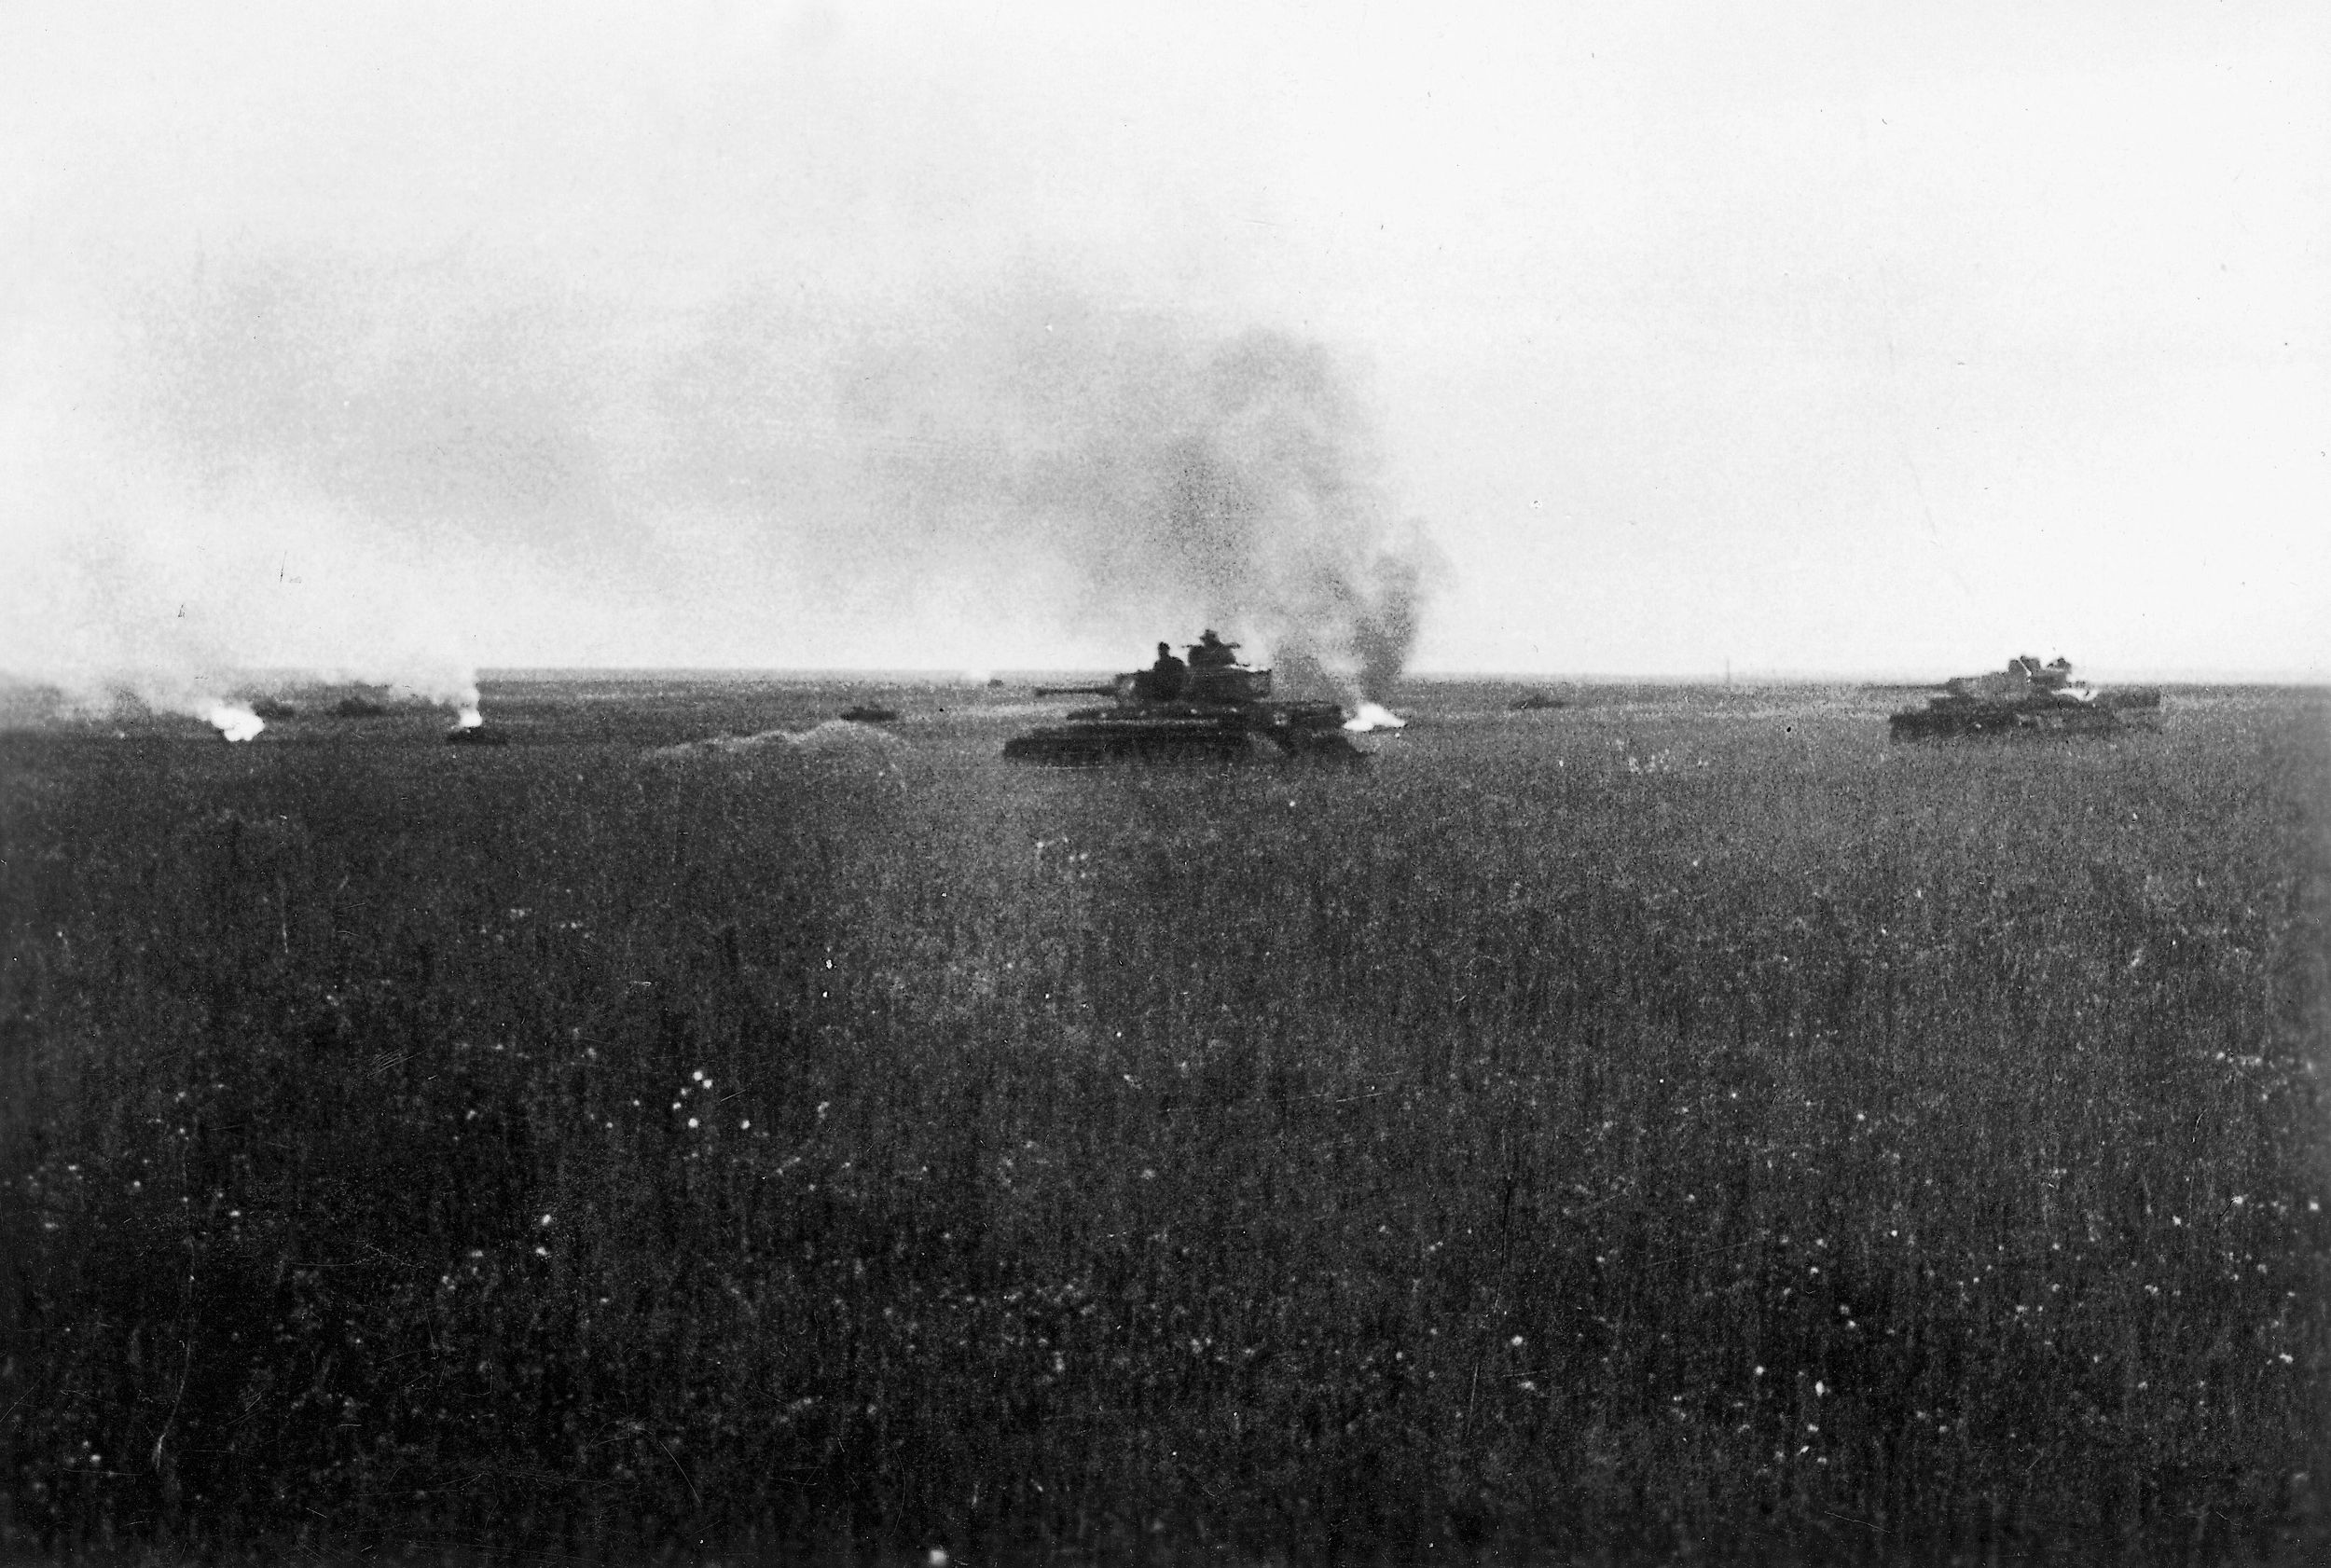 Two German panzers roll forward warily as pillars of smoke rise from disabled armored vehicles. Kursk pitted large German and Soviet tank formations against one another. The fighting at Prokhorovka, nicknamed the Gulley of Death, was particularly bitter.